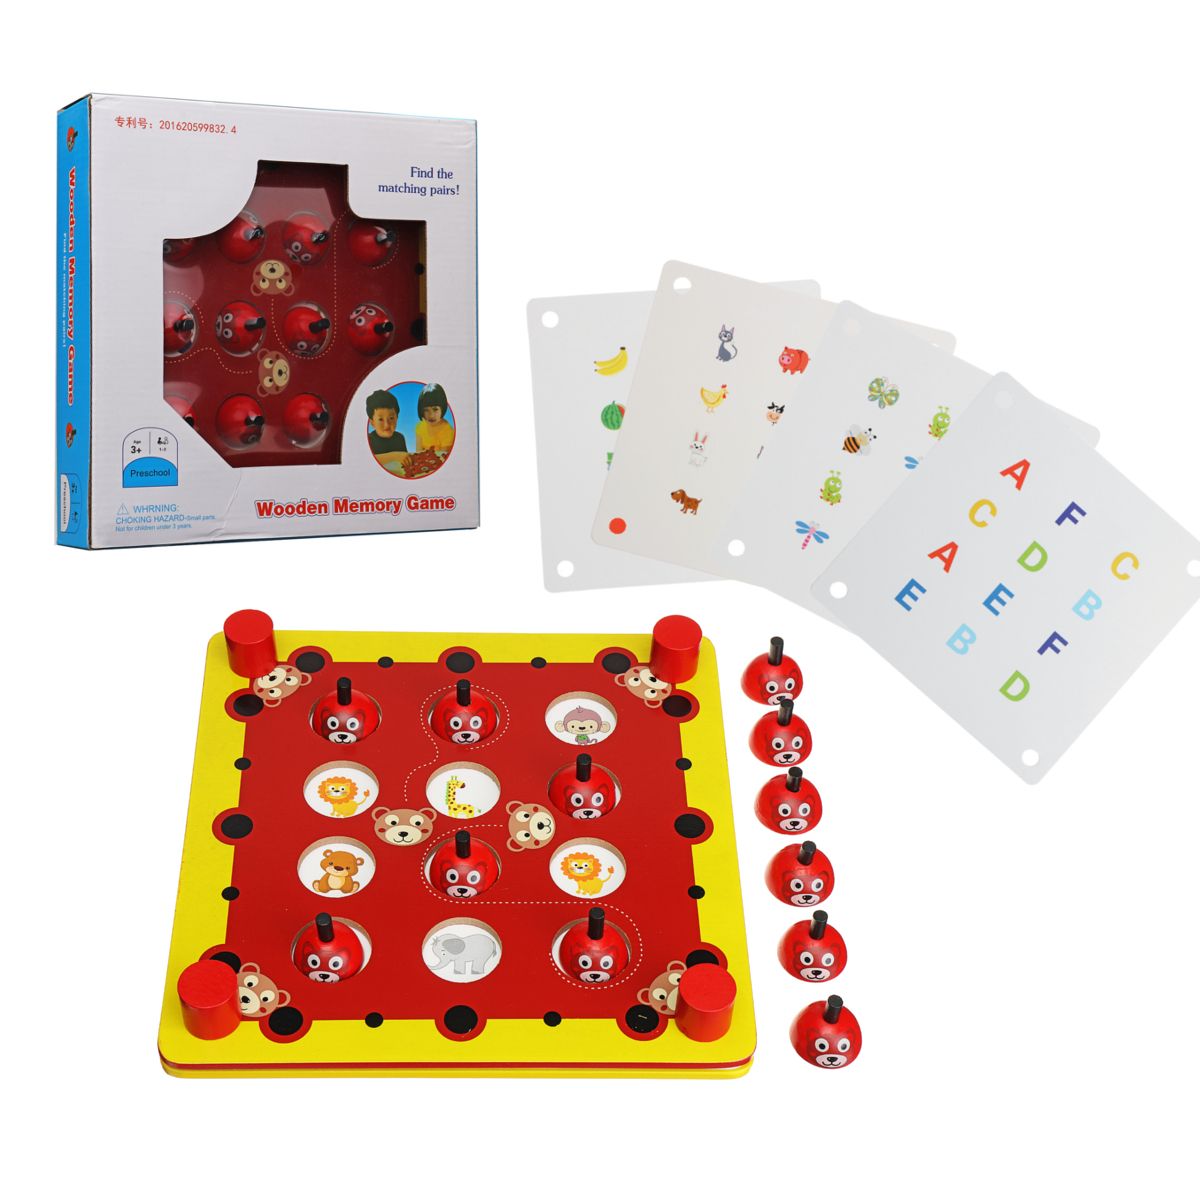 Wood-Puzzles-Memory-Matching-Game-Educational-Toys-Board-Games-For-Children-Kids-1459271